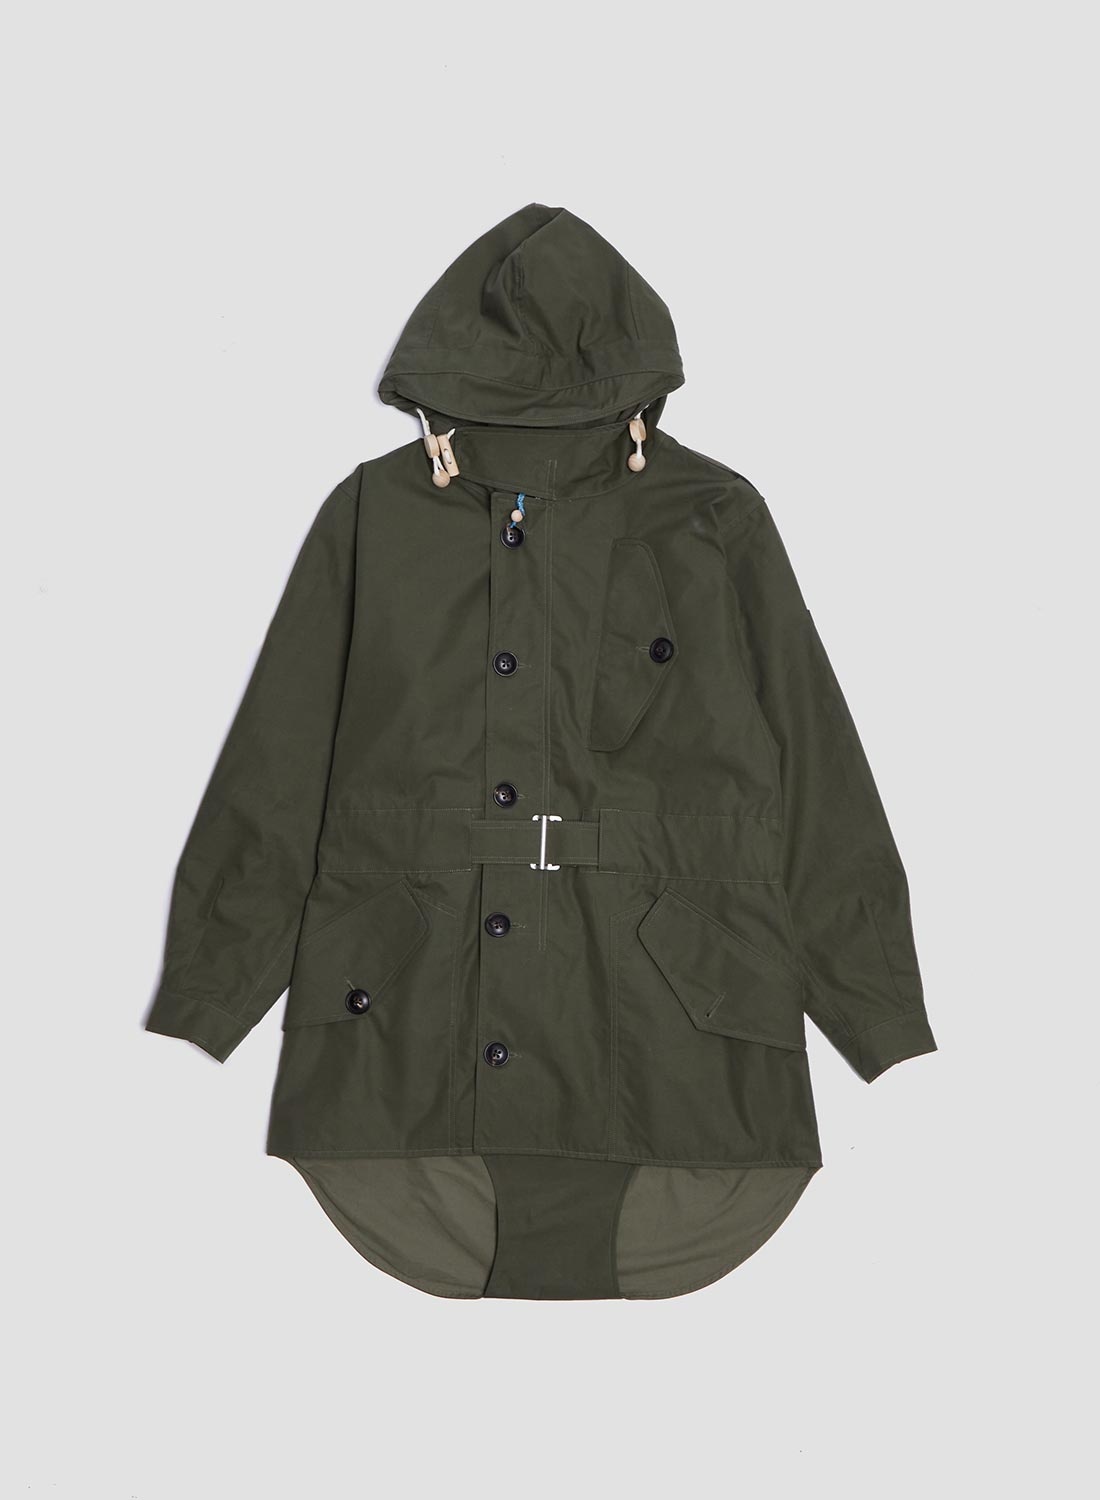 Cold Weather Parka in Olive - 1